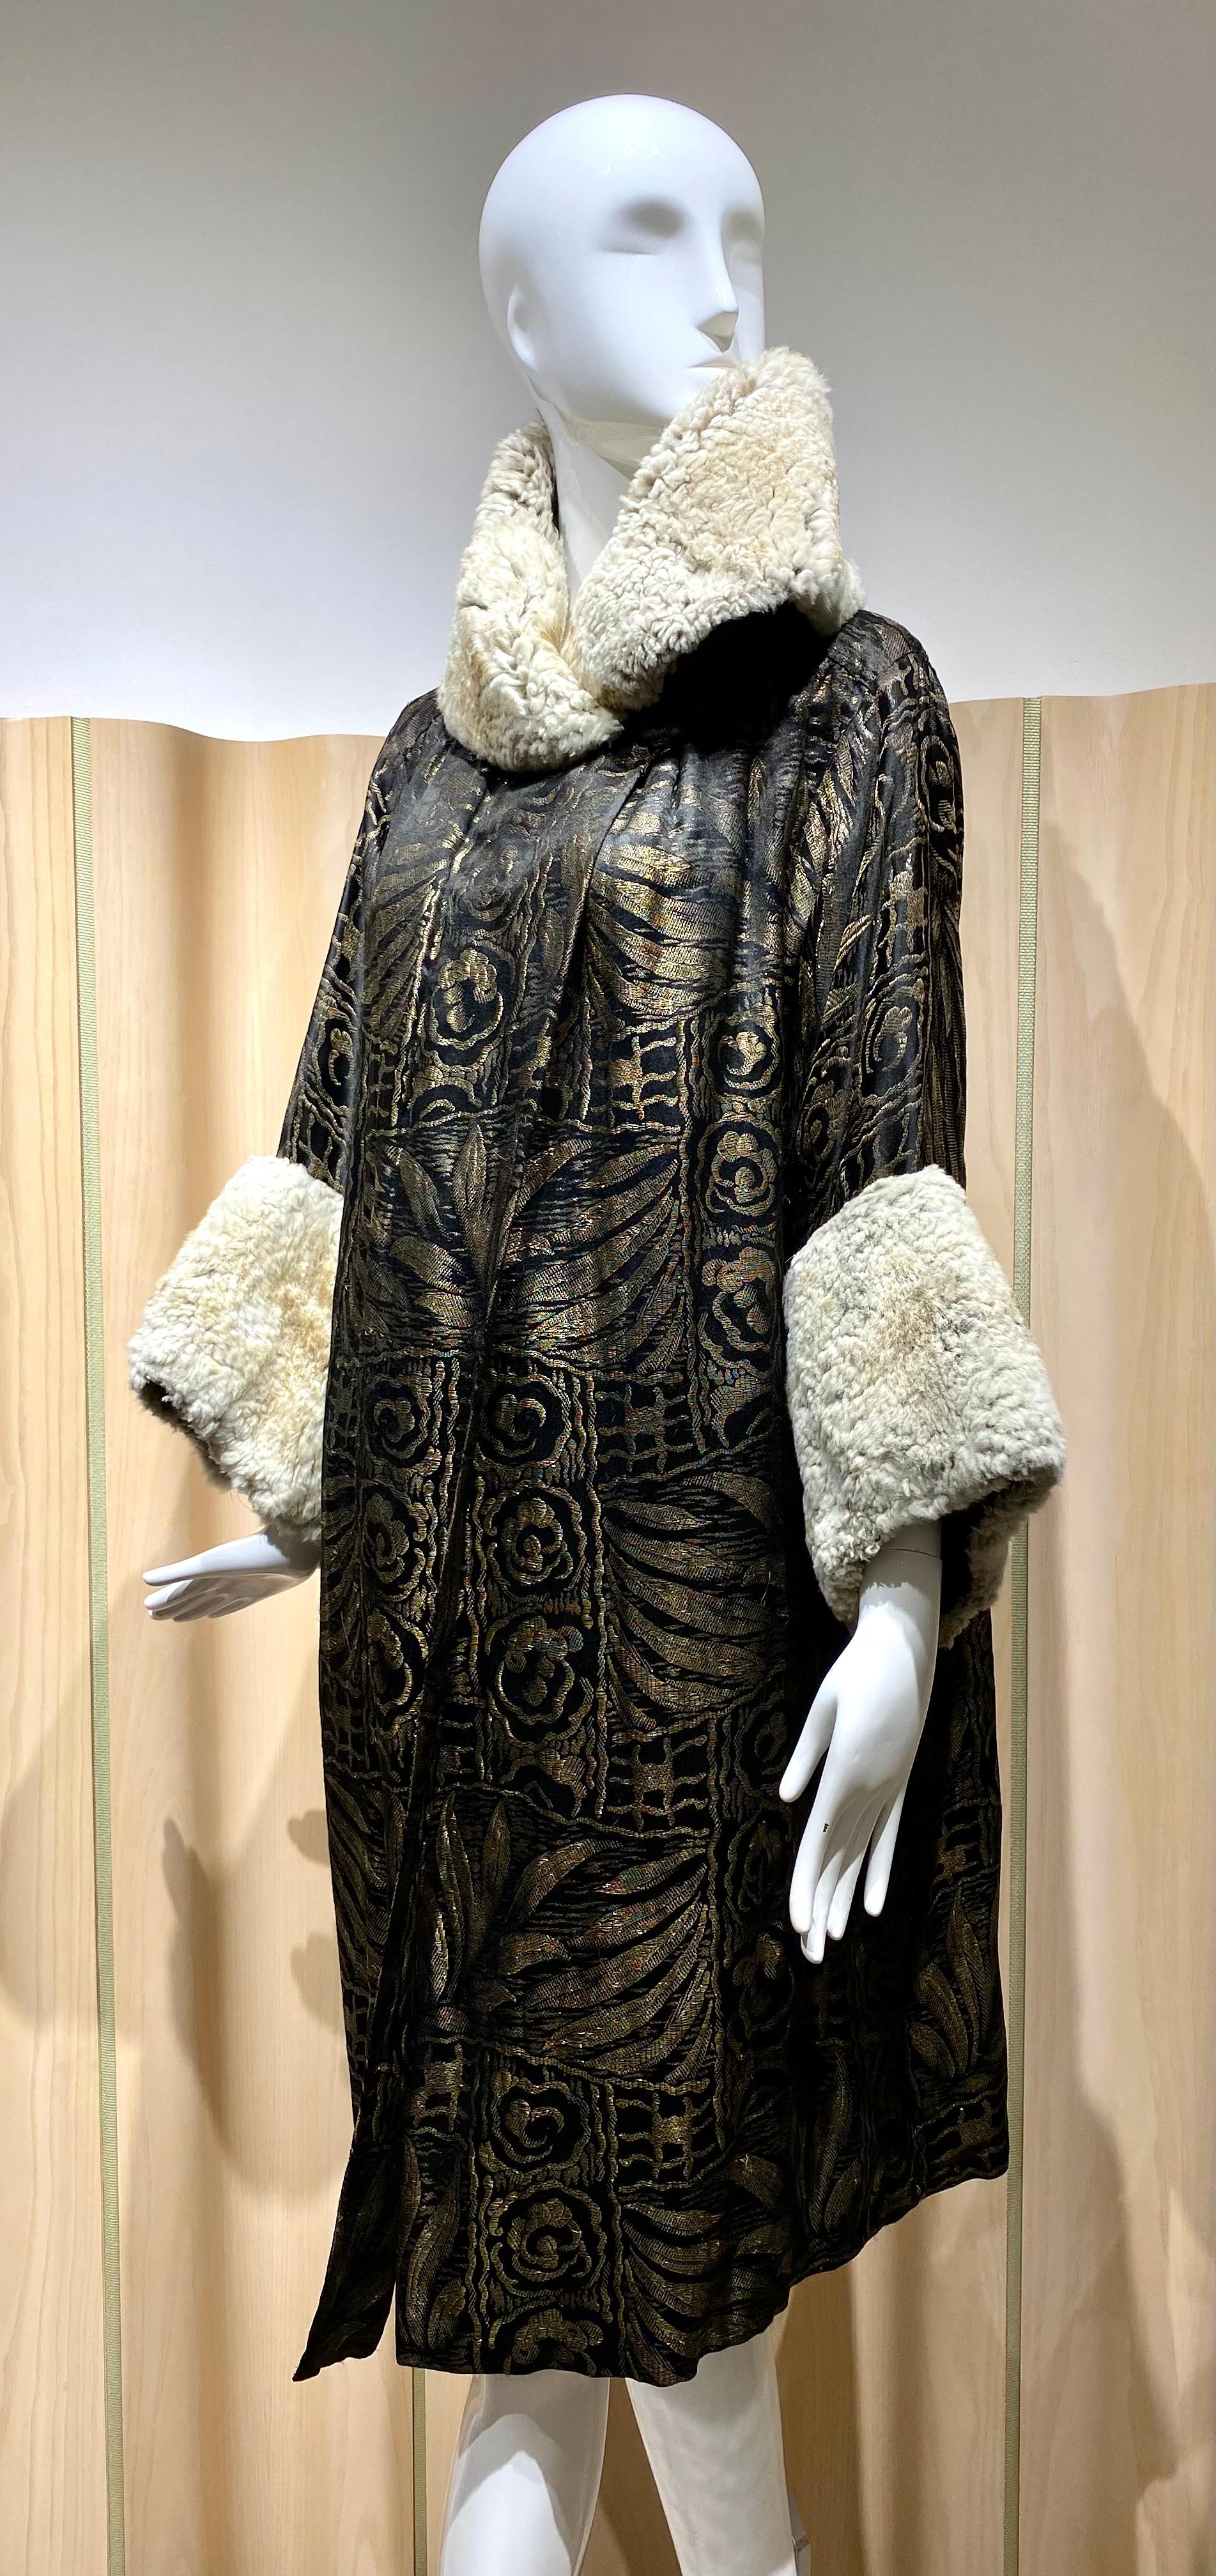 1920s Art Deco Black and Gold silk lame coat with soft fur. Coat is lined in silk charmeuse .
Size: Small and Medium
Measurement:
